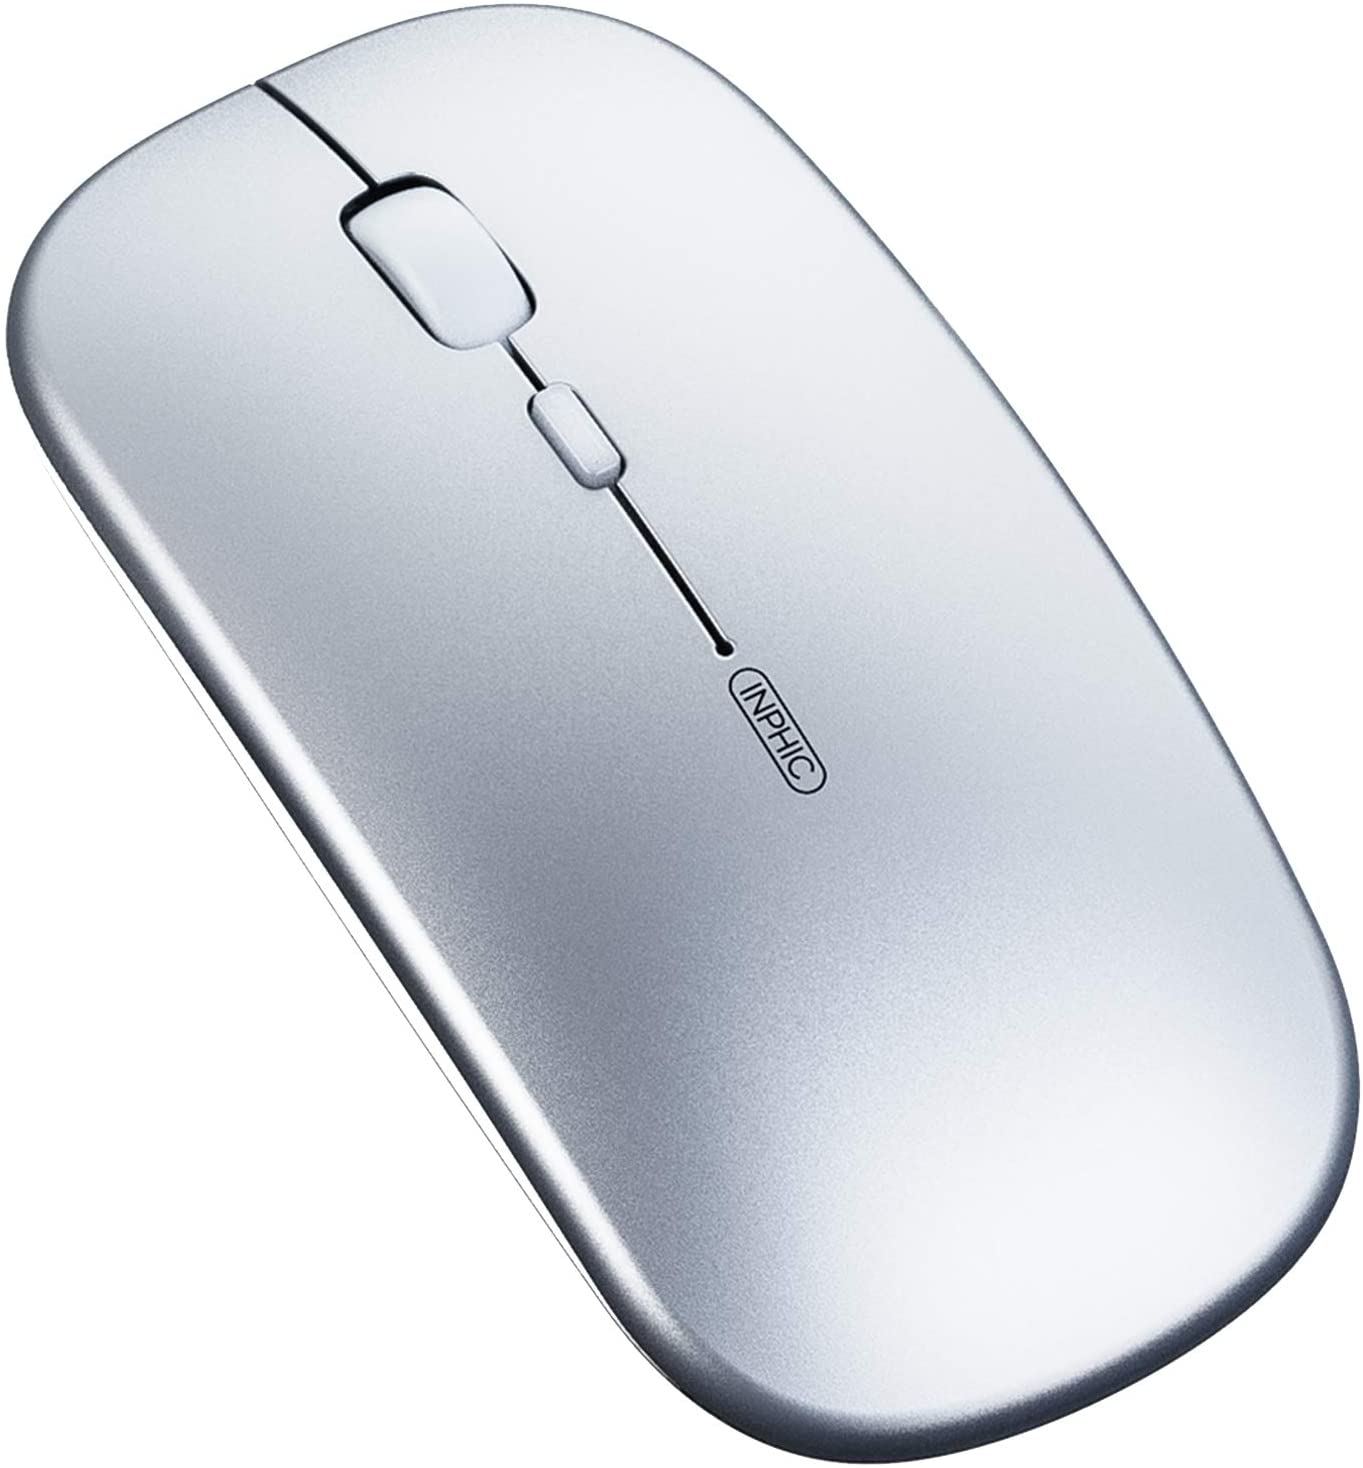 inphic mouse bluetooth